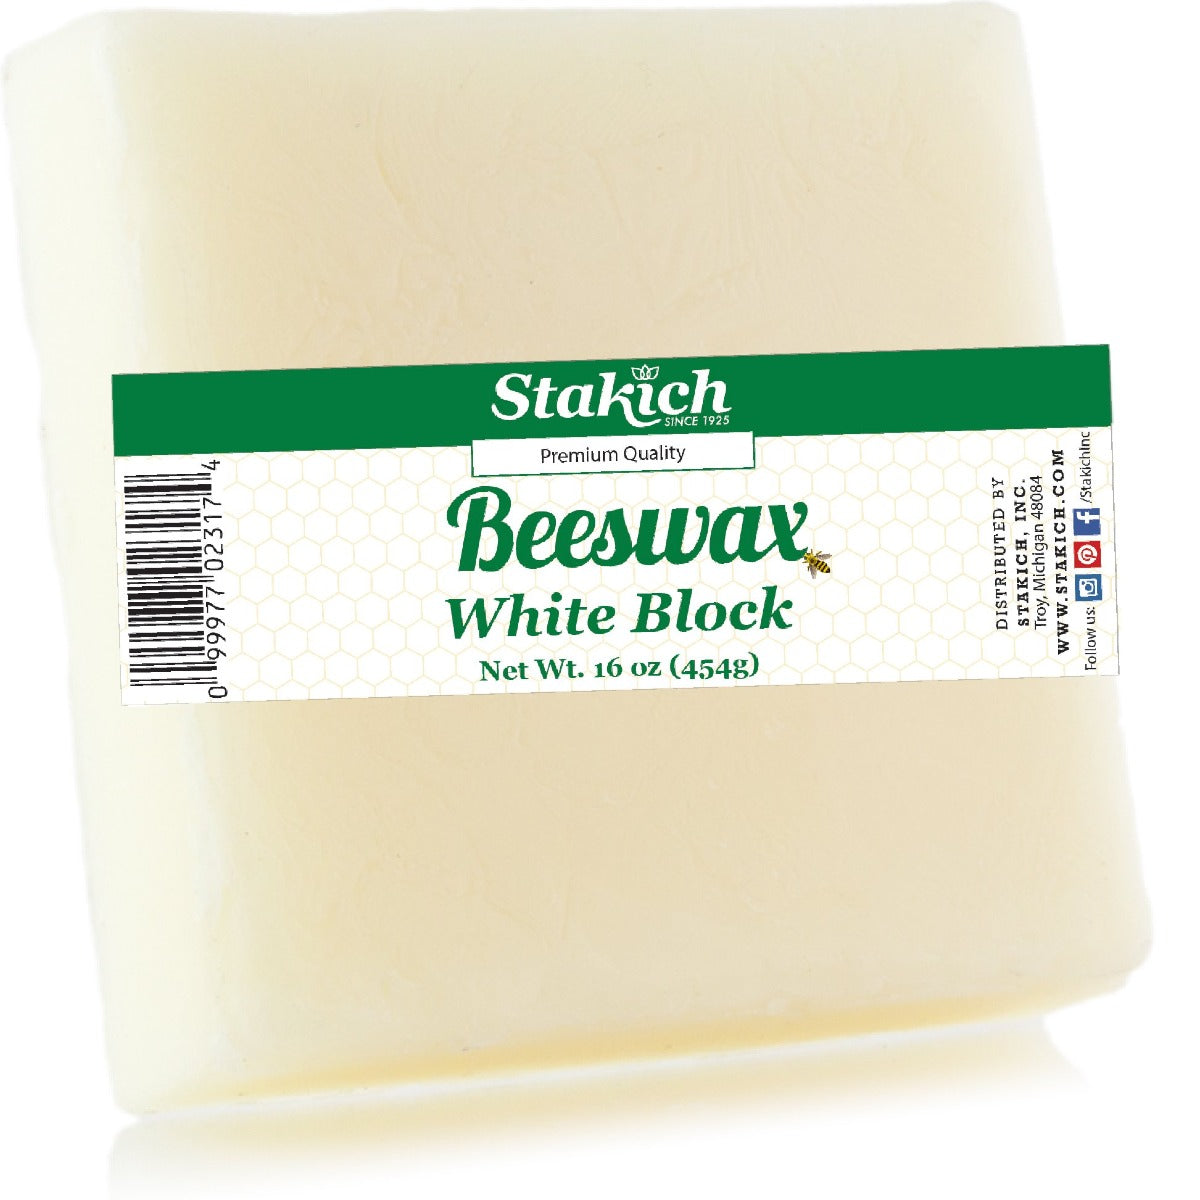 Stakich White Beeswax Block - Natural, Cosmetic Grade - 1 Pound